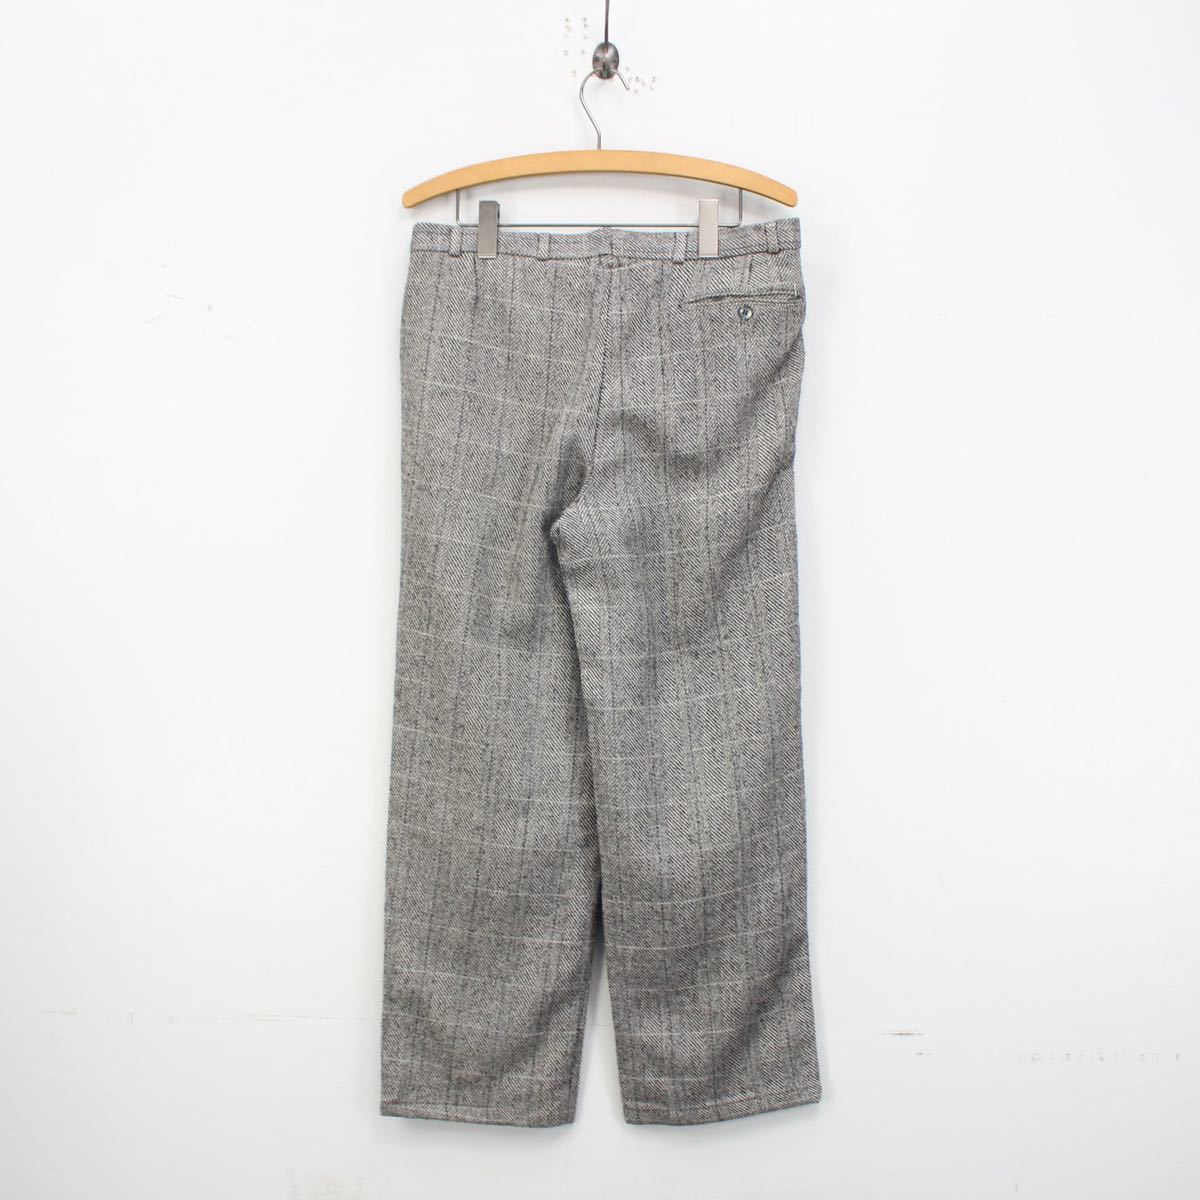 EU VINTAGE angelo Litrico CHECK PATTERNED TWEED SET UP SUIT/ヨーロッパ古着チェック柄ツイードセットアップスーツ